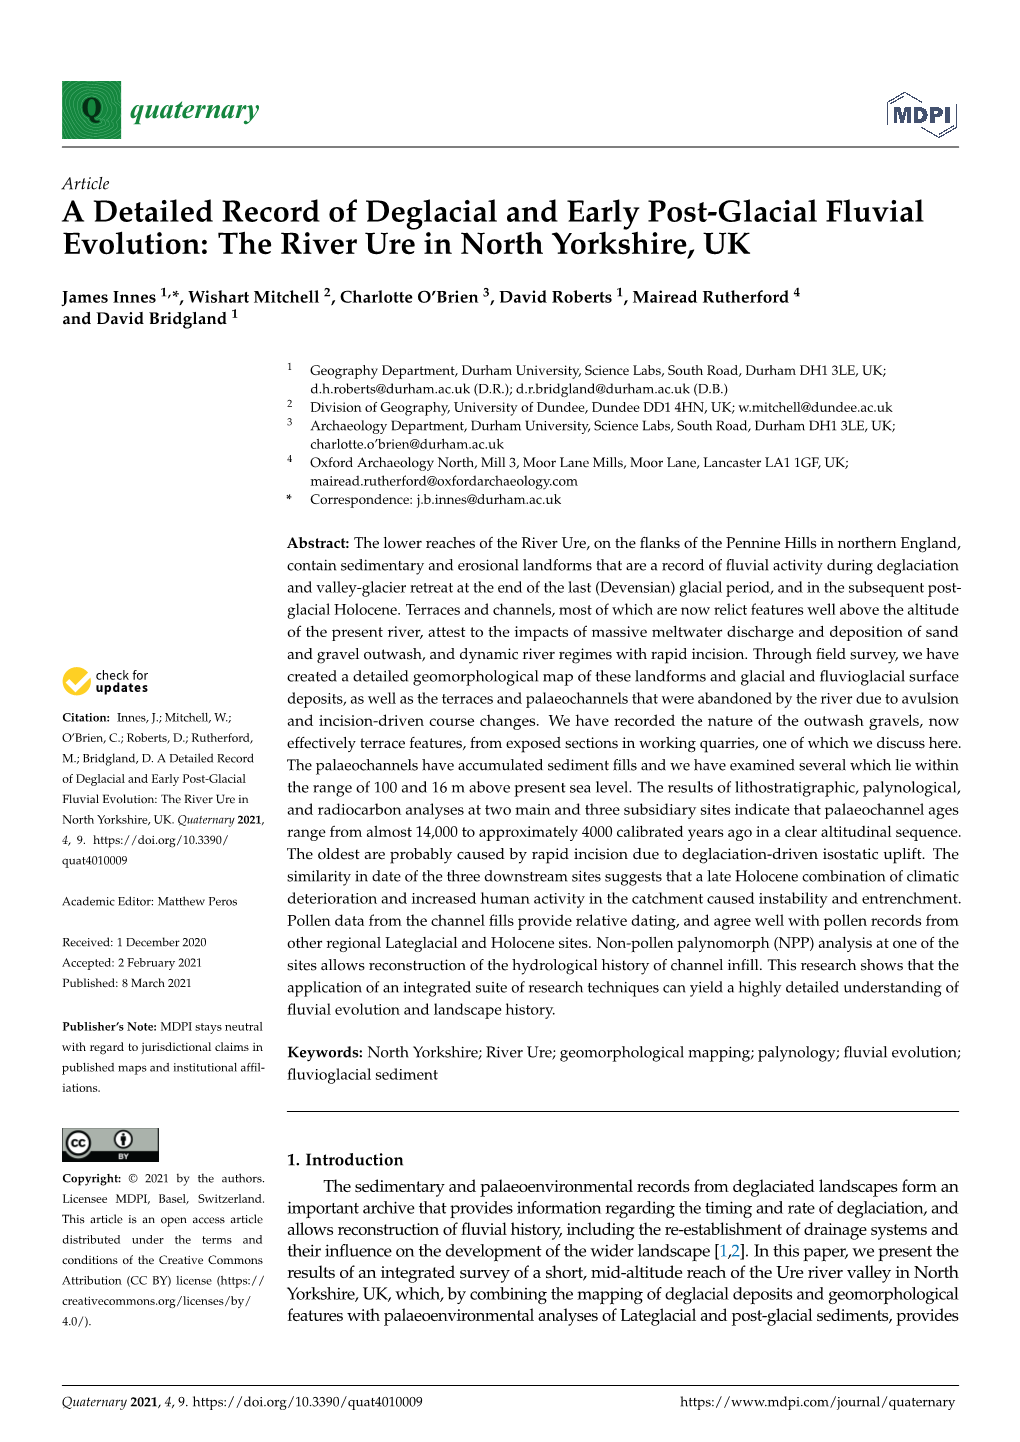 A Detailed Record of Deglacial and Early Post-Glacial Fluvial Evolution: the River Ure in North Yorkshire, UK